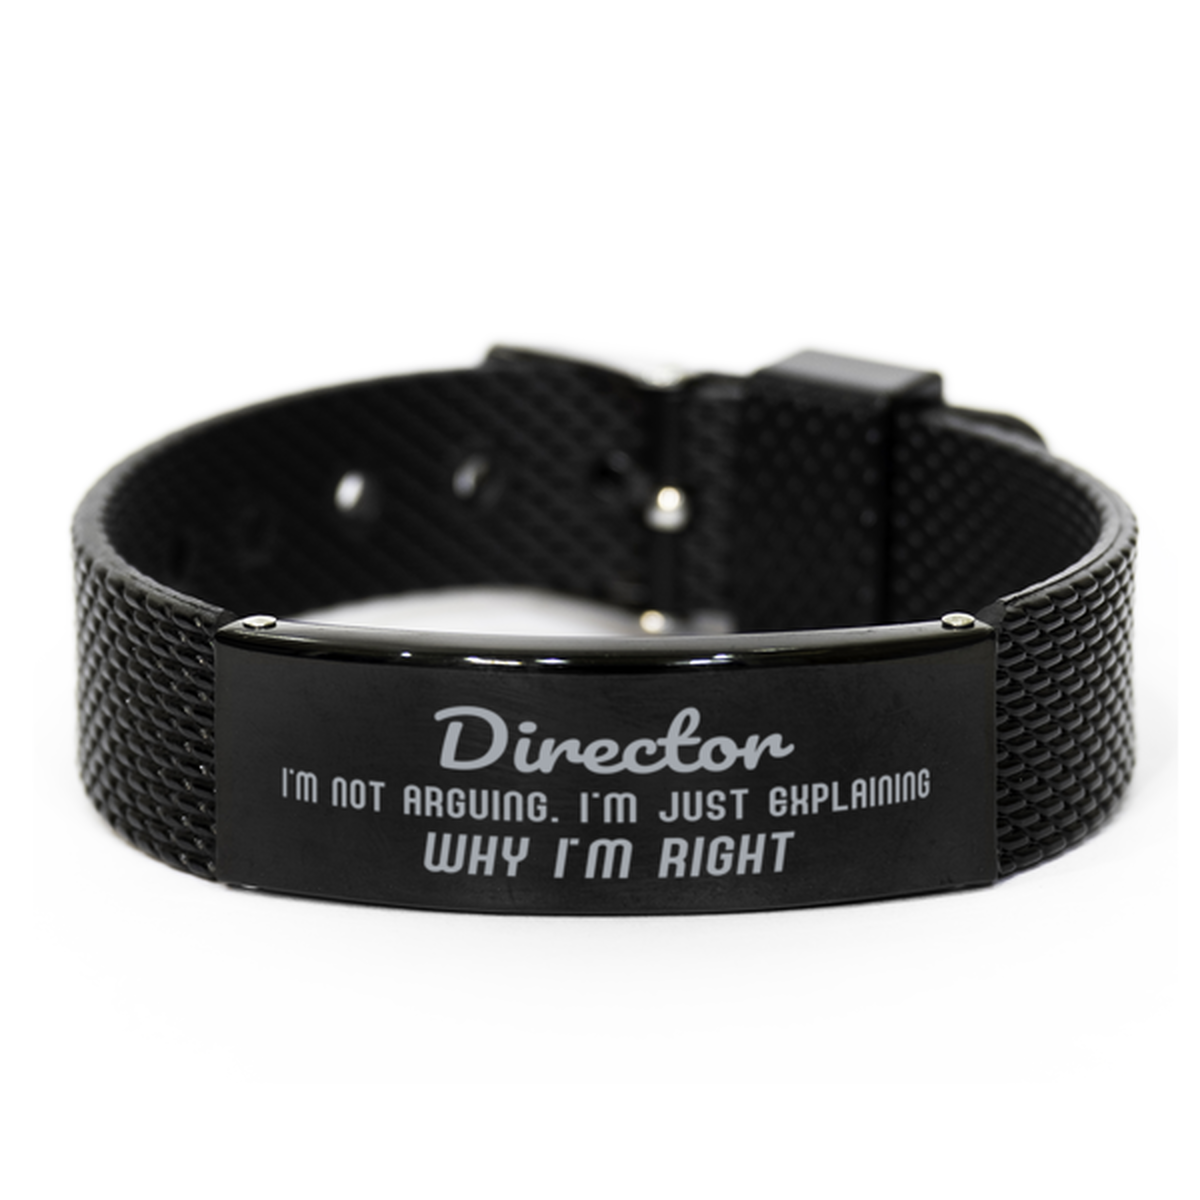 Director I'm not Arguing. I'm Just Explaining Why I'm RIGHT Black Shark Mesh Bracelet, Funny Saying Quote Director Gifts For Director Graduation Birthday Christmas Gifts for Men Women Coworker